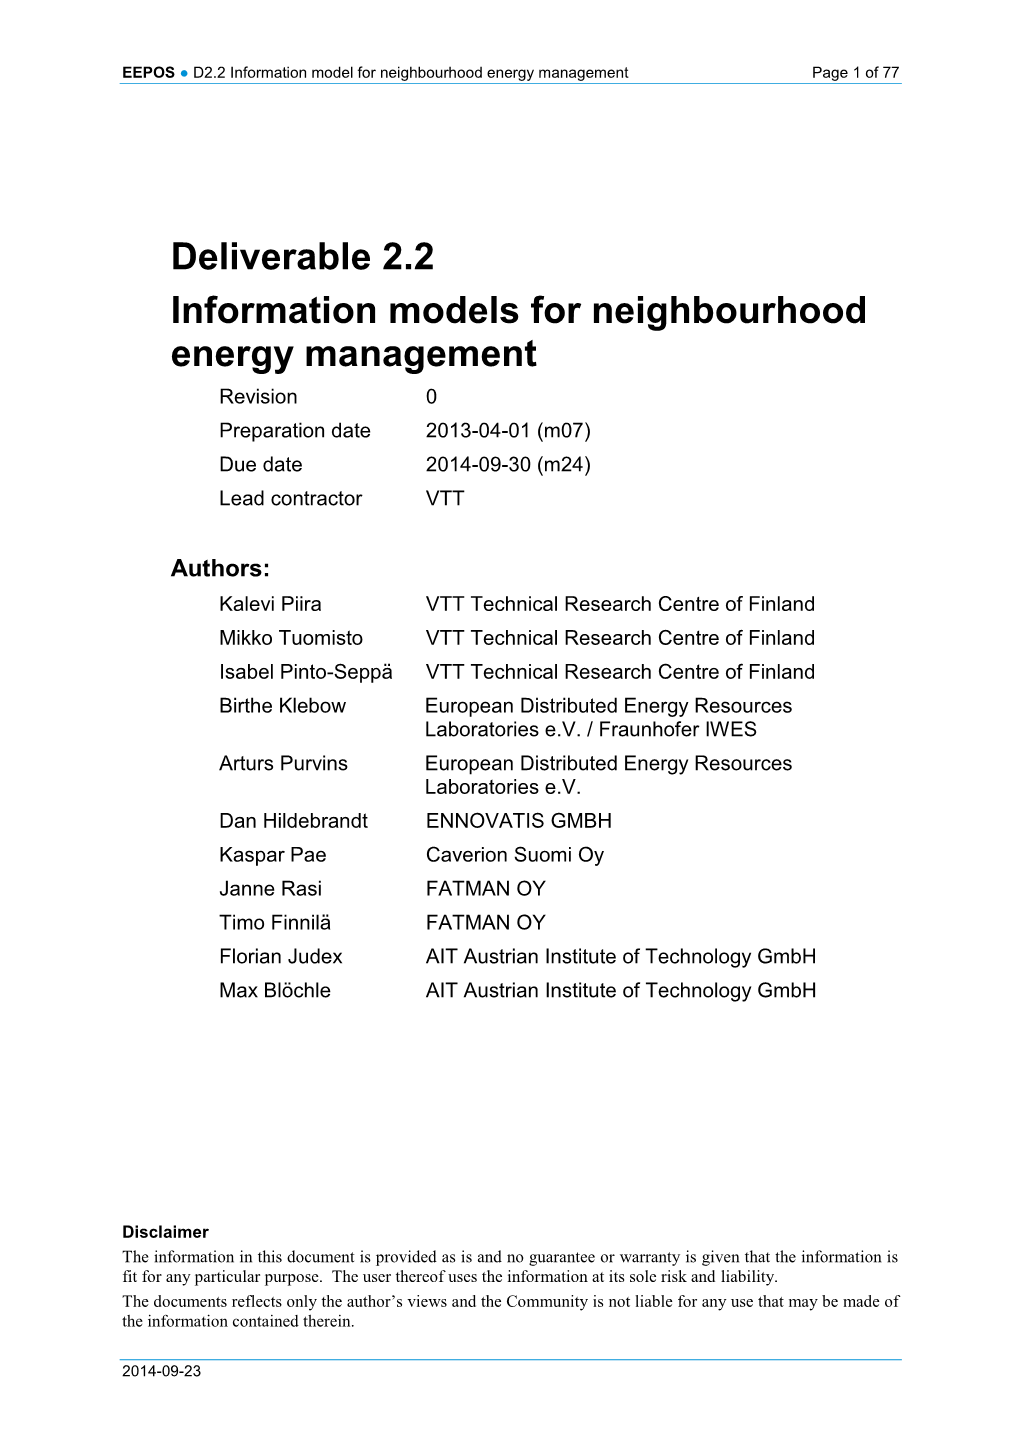 Information Models for Neighbourhood Energy Management Revision 0 Preparation Date 2013-04-01 (M07) Due Date 2014-09-30 (M24) Lead Contractor VTT